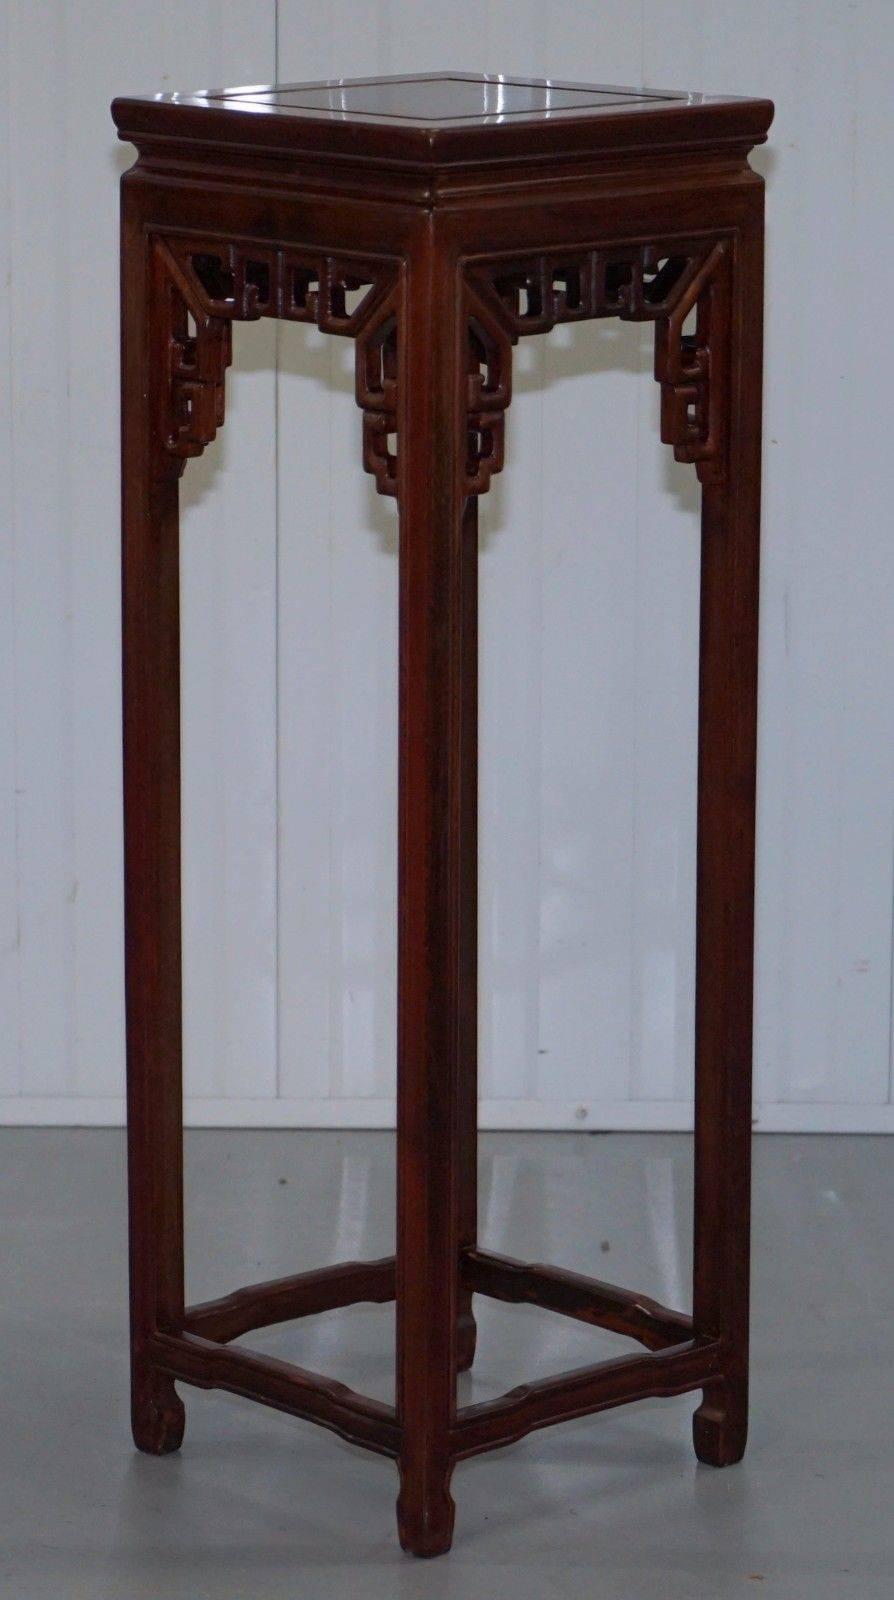 We are delighted to offer for sale this very nice solid wood Chinese Chen Leung Jardiniere plant pot stand

A very good looking well-made and decorative piece in excellent condition throughout, we have lightly cleaned hand condition waxed and hand